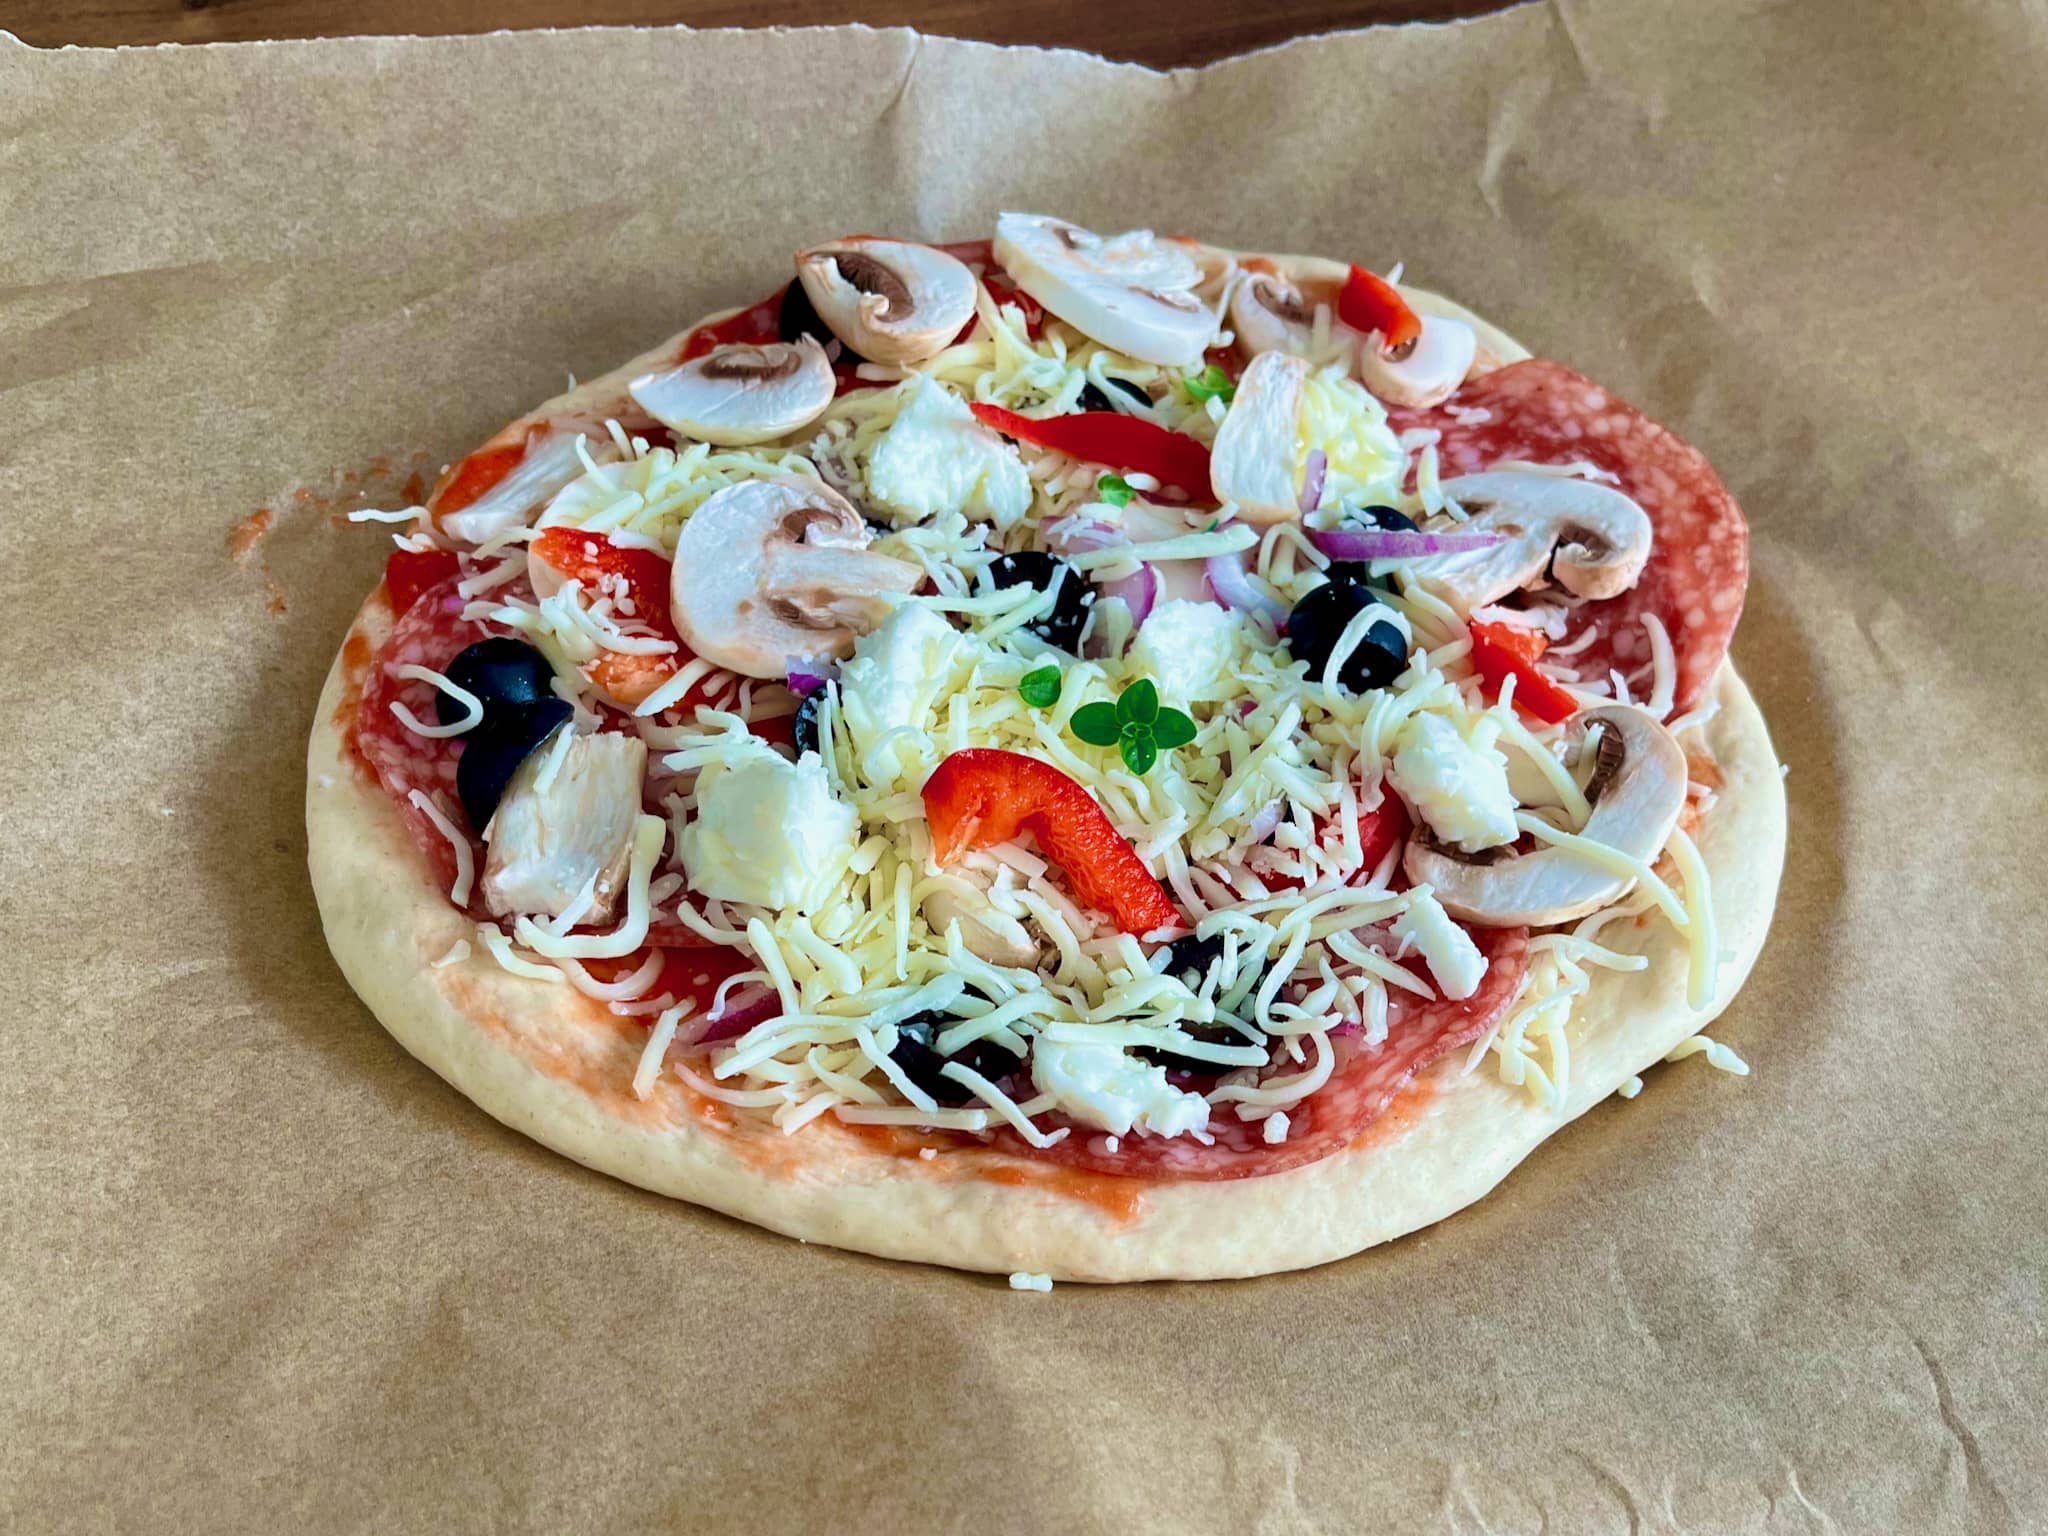 Pizza base with sauce and toppings